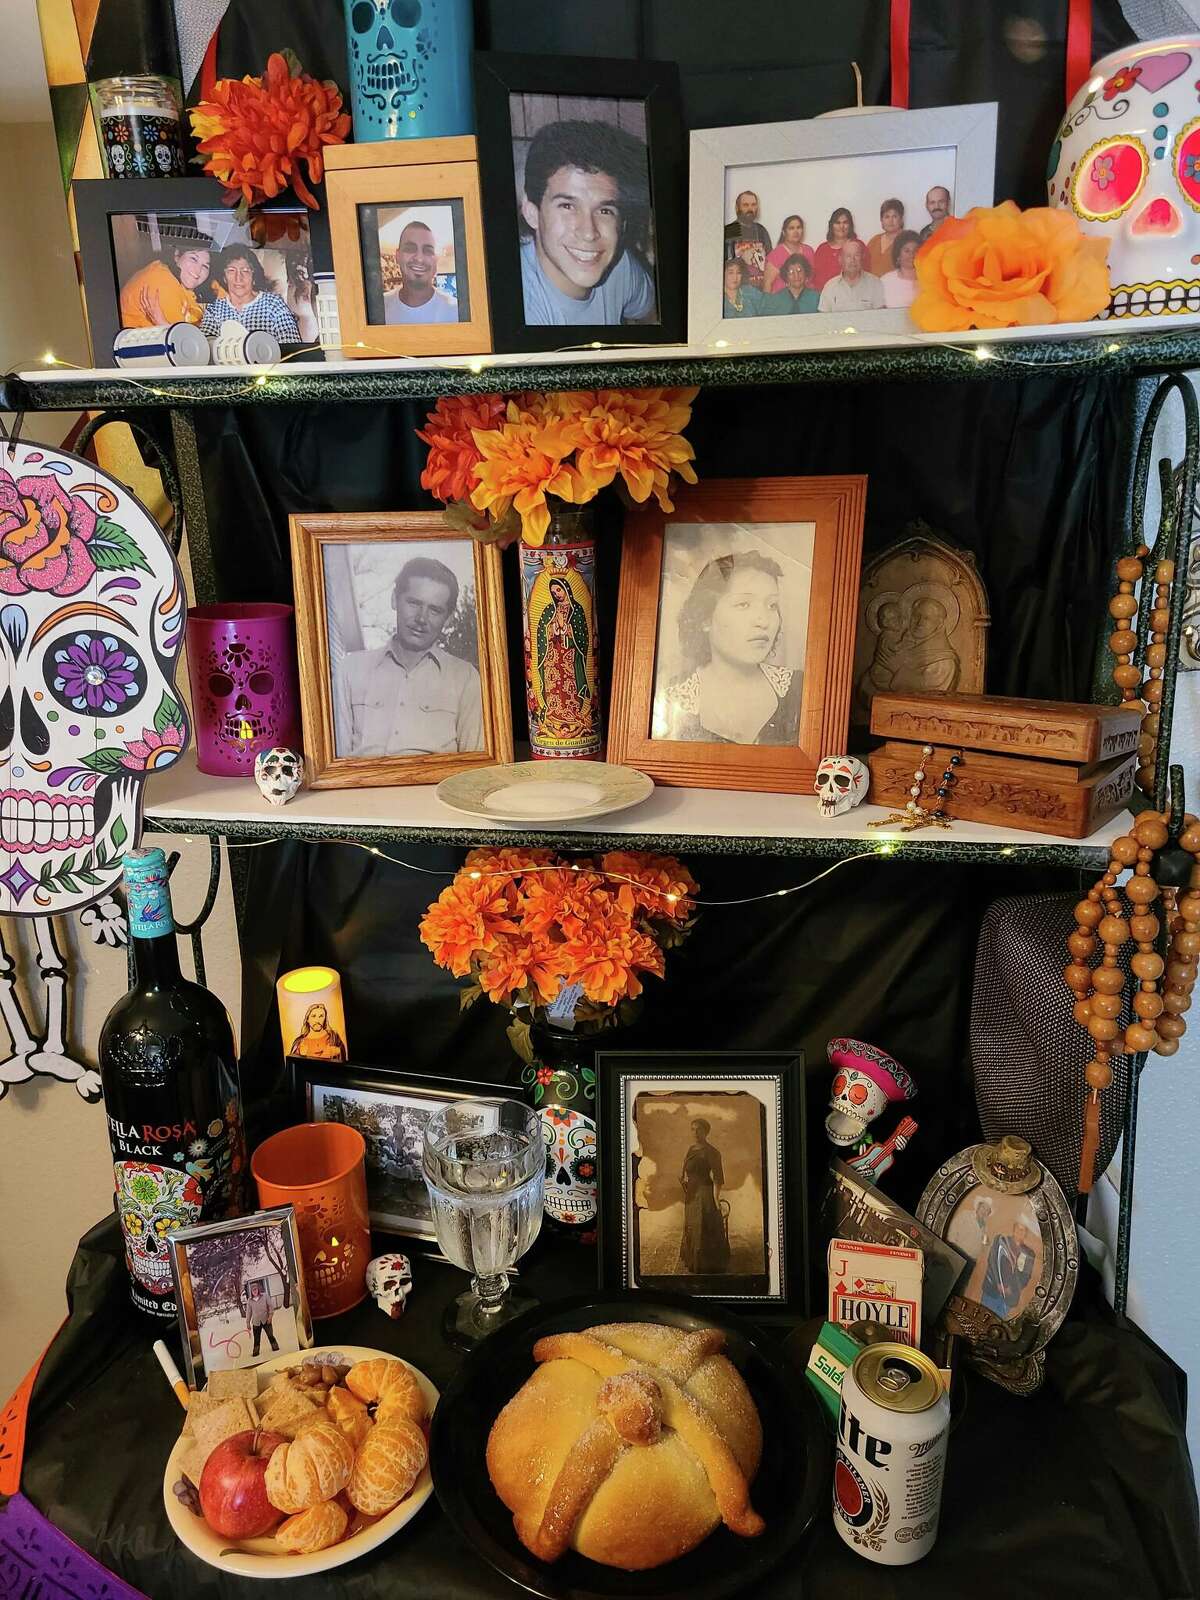 Family photos and offerings fill an ofrenda in honor of Día de los Muertos, the two-day traditional holiday honoring the dead. (Photo by Gabby Tellez.)